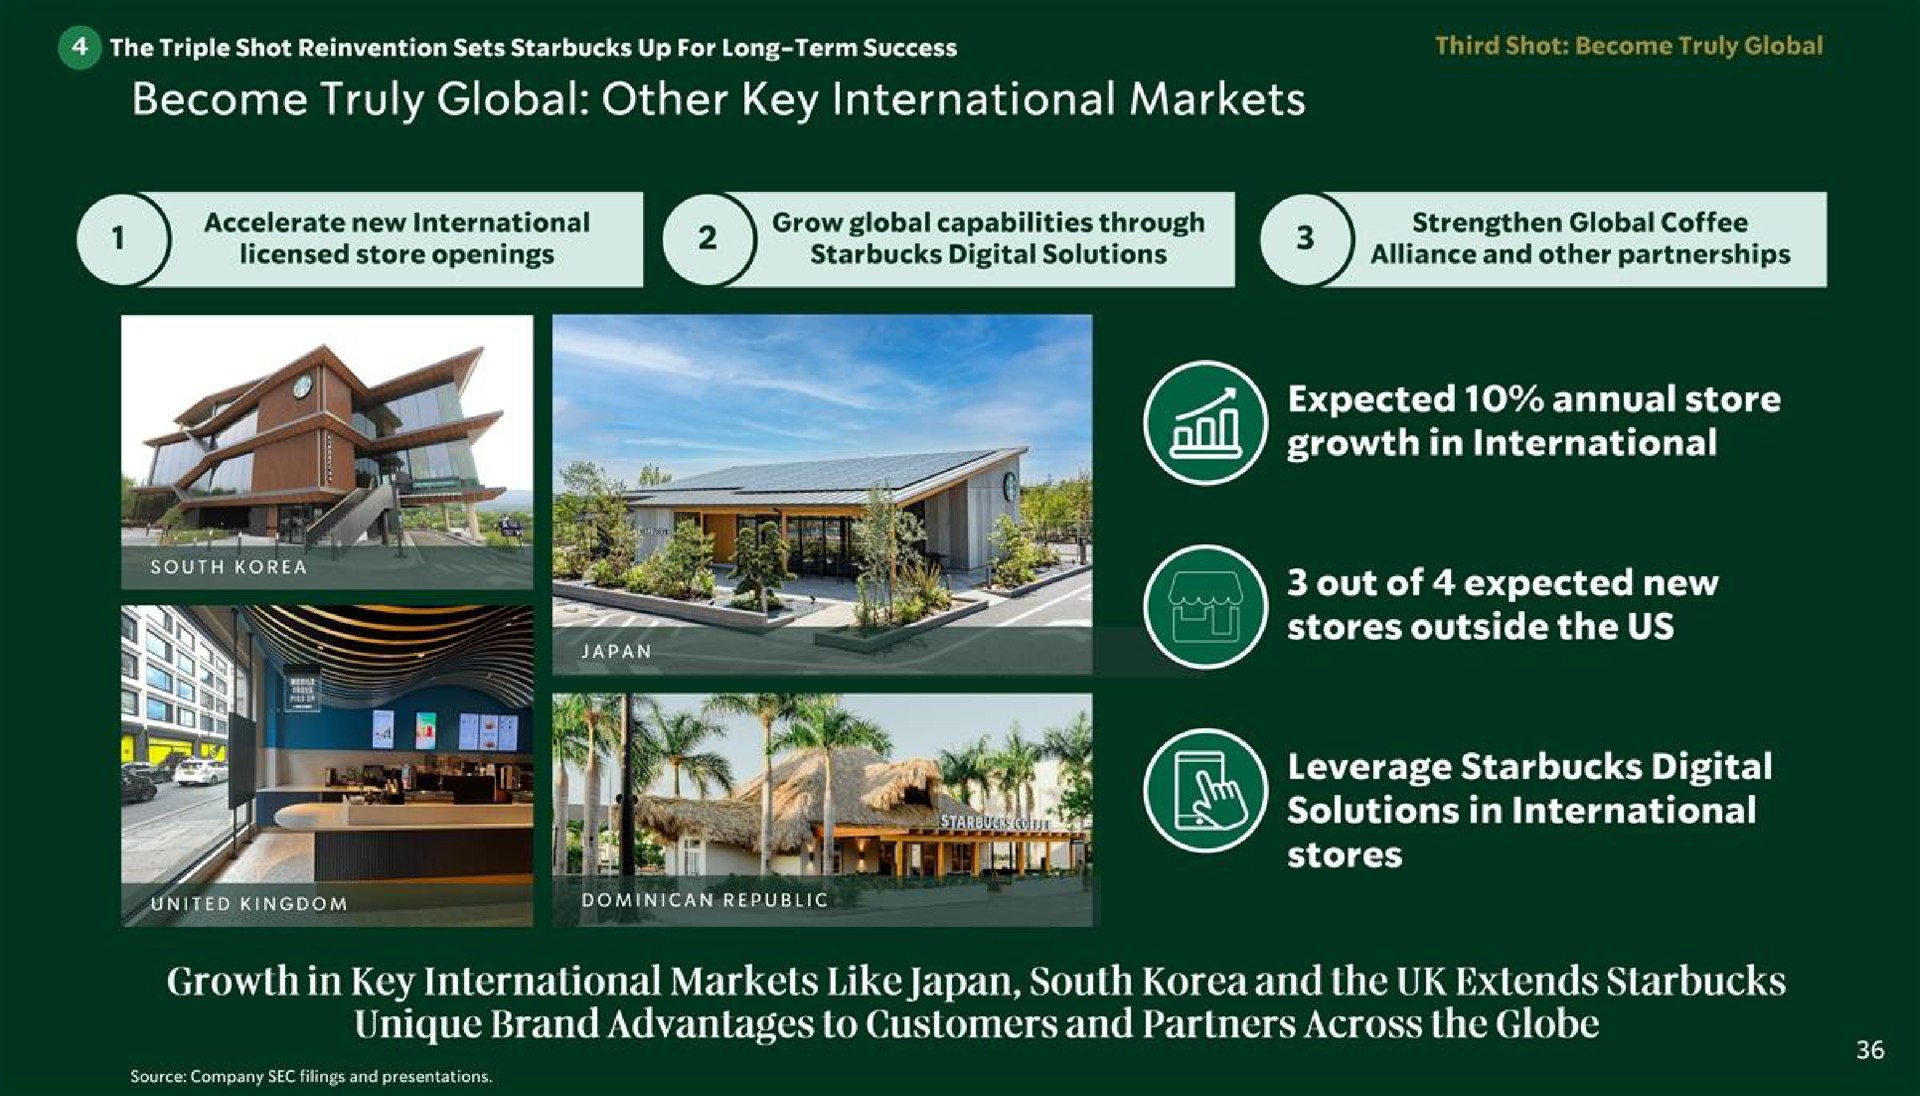 become truly global other key international markets expected annual store growth in international out of expected new stores outside the us leverage digital growth in key international markets like japan south and the extends unique brand advantages to customers and partners across the globe | Starbucks